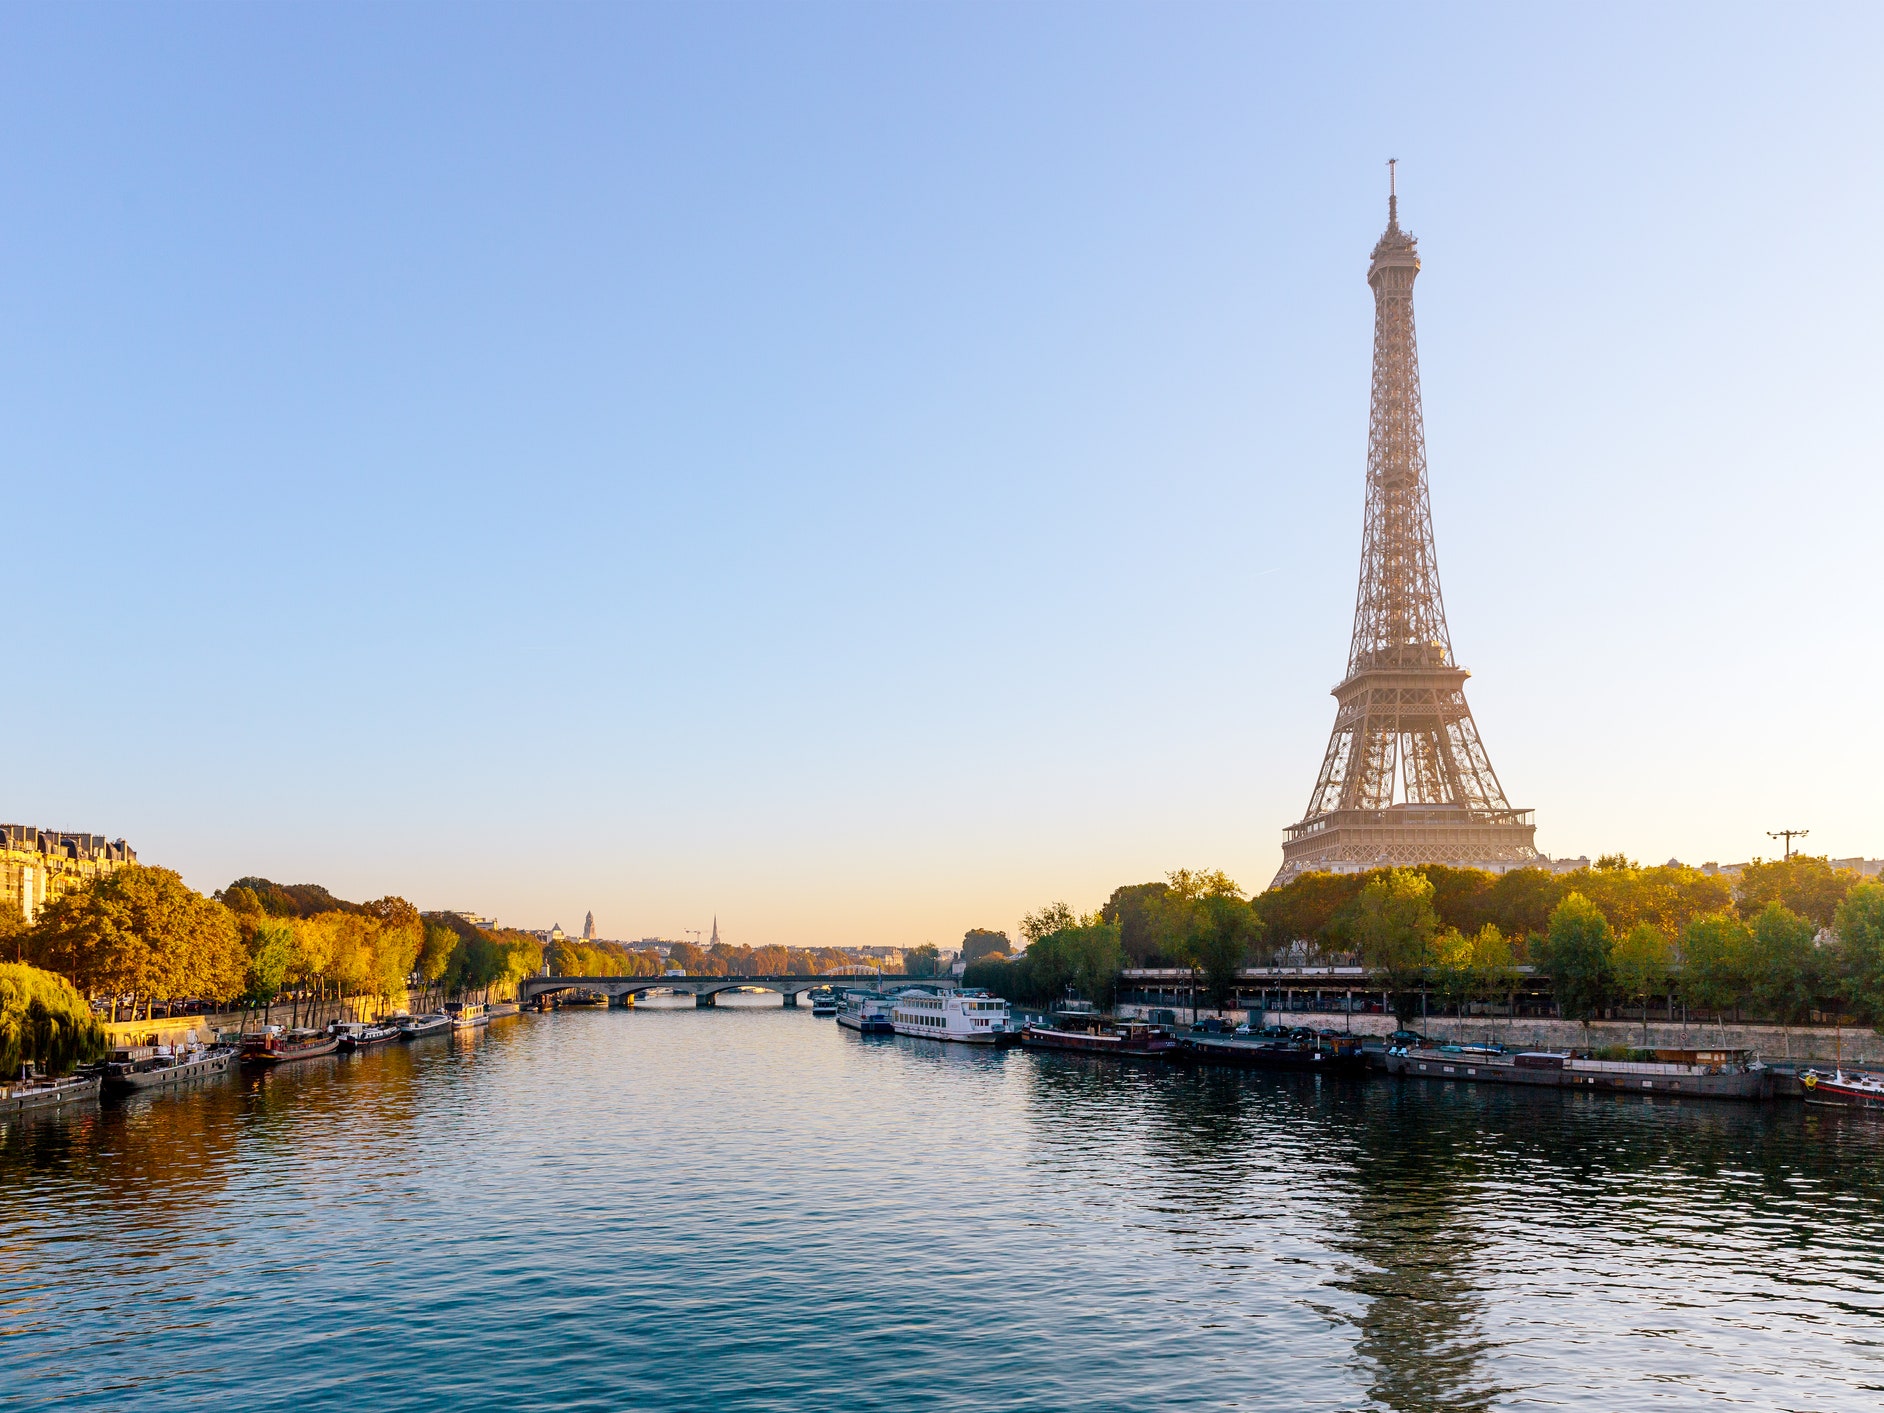 Ever fancied cooling down with a dip in the Seine? By 2025, the thought may be much more appealing than you think